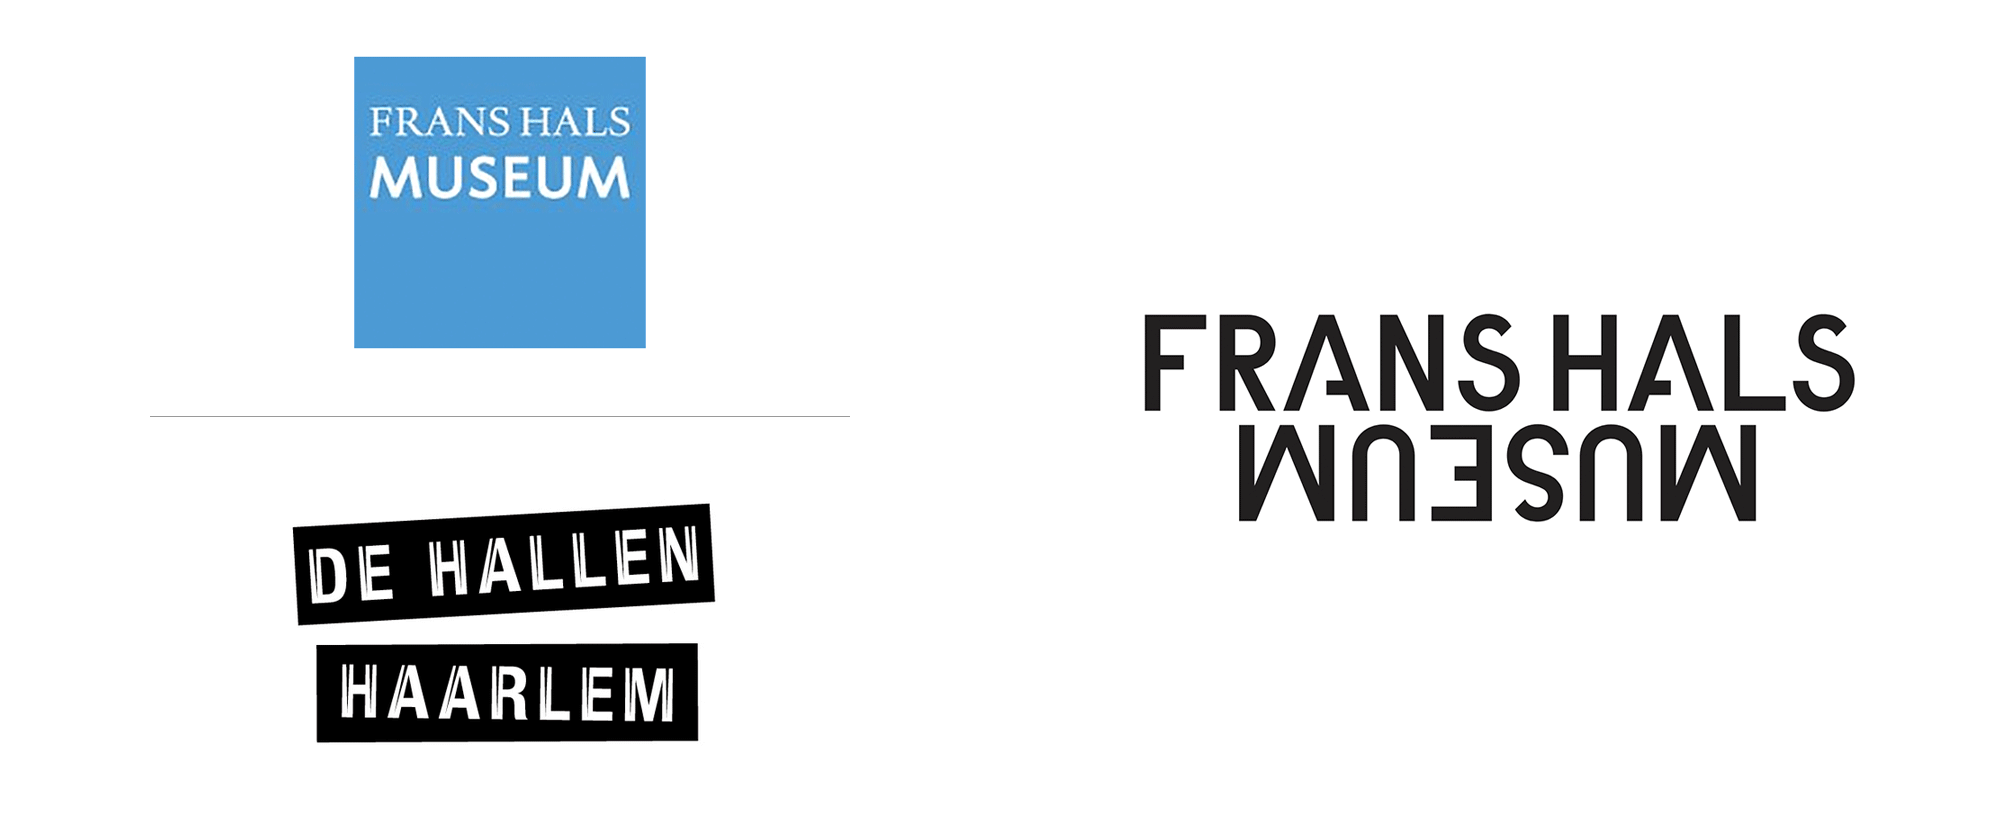 Museum Logo - Brand New: New Logo and Identity for Frans Hals Museum